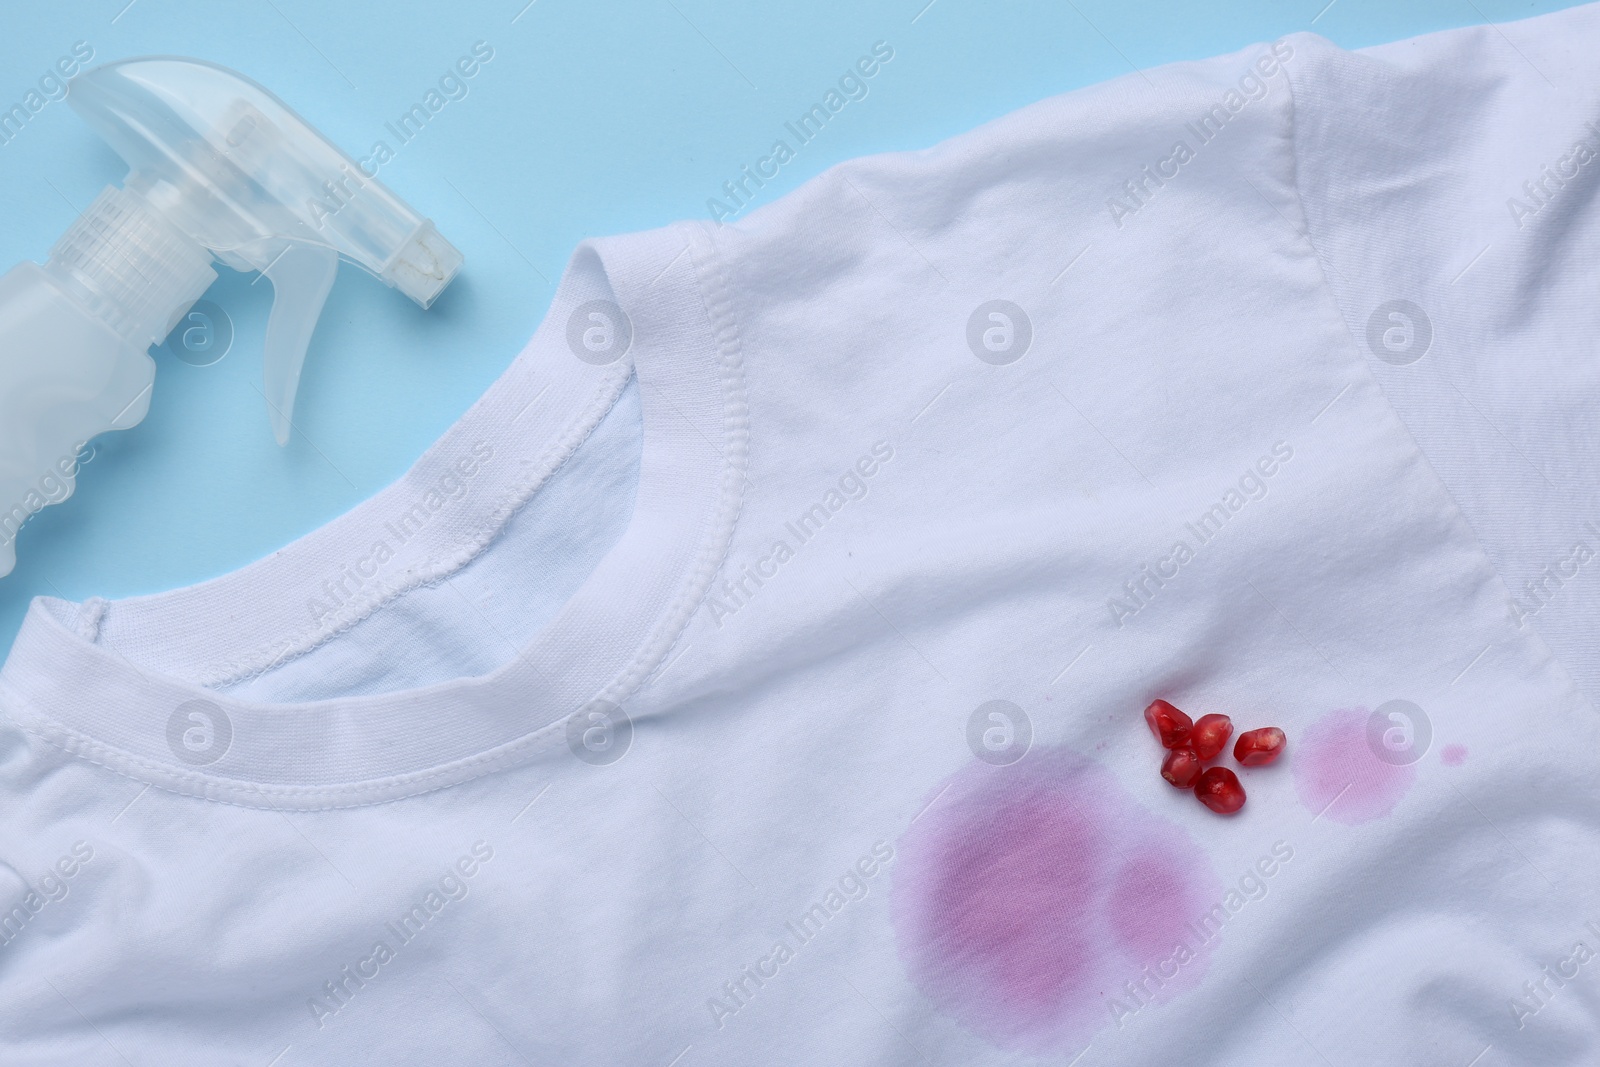 Photo of White shirt with fruit juicy stains, detergent and pomegranate seeds on light blue background, flat lay